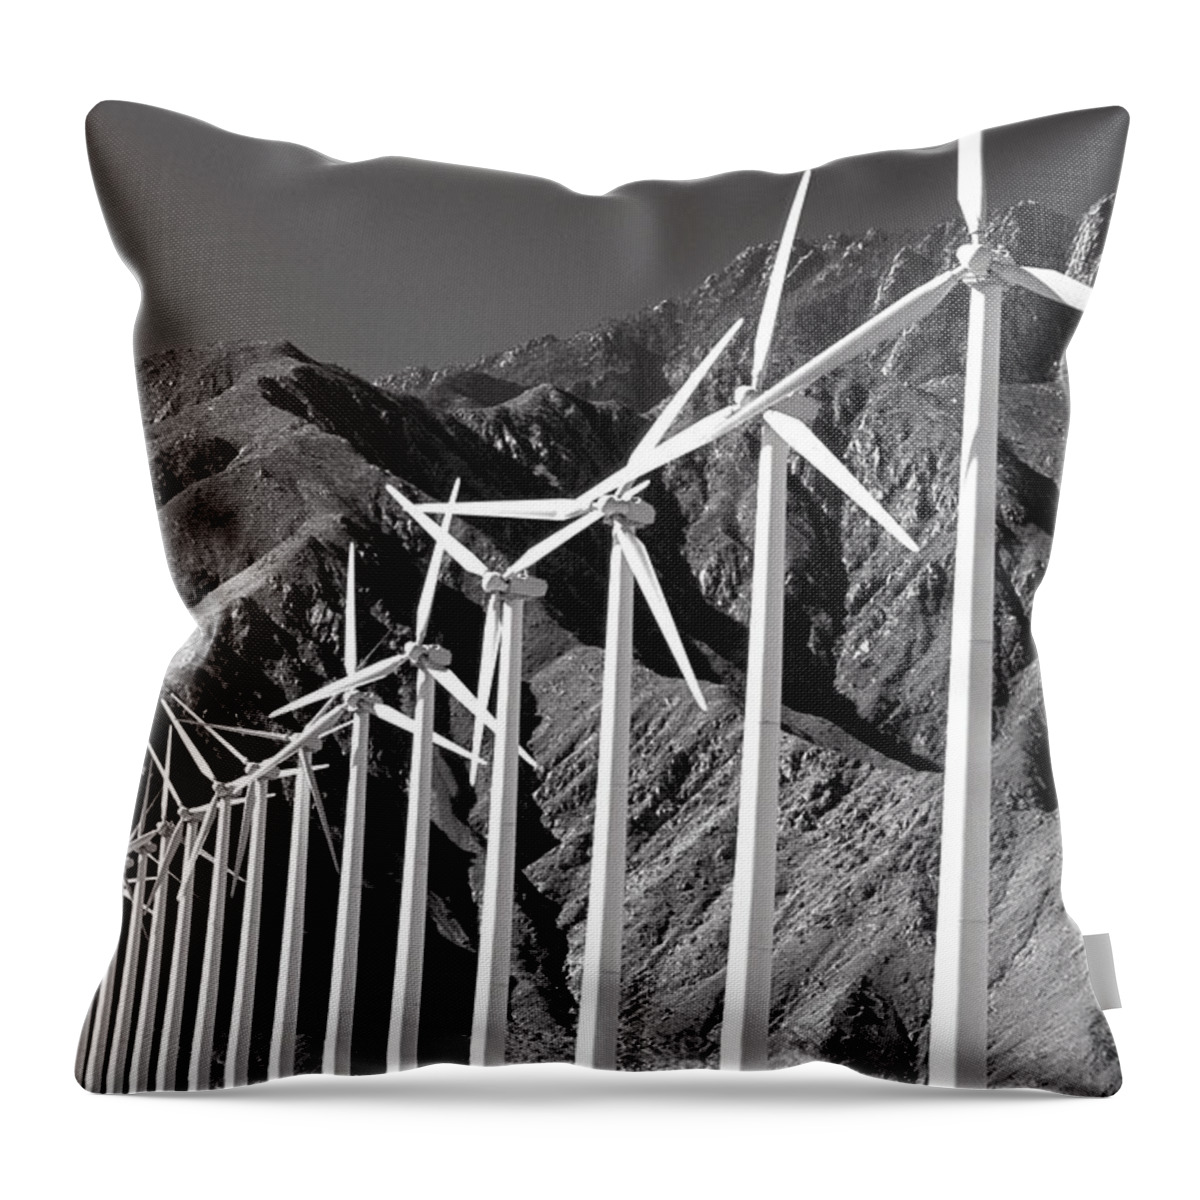 B&w Throw Pillow featuring the photograph Wind Generators by Jeff Phillippi